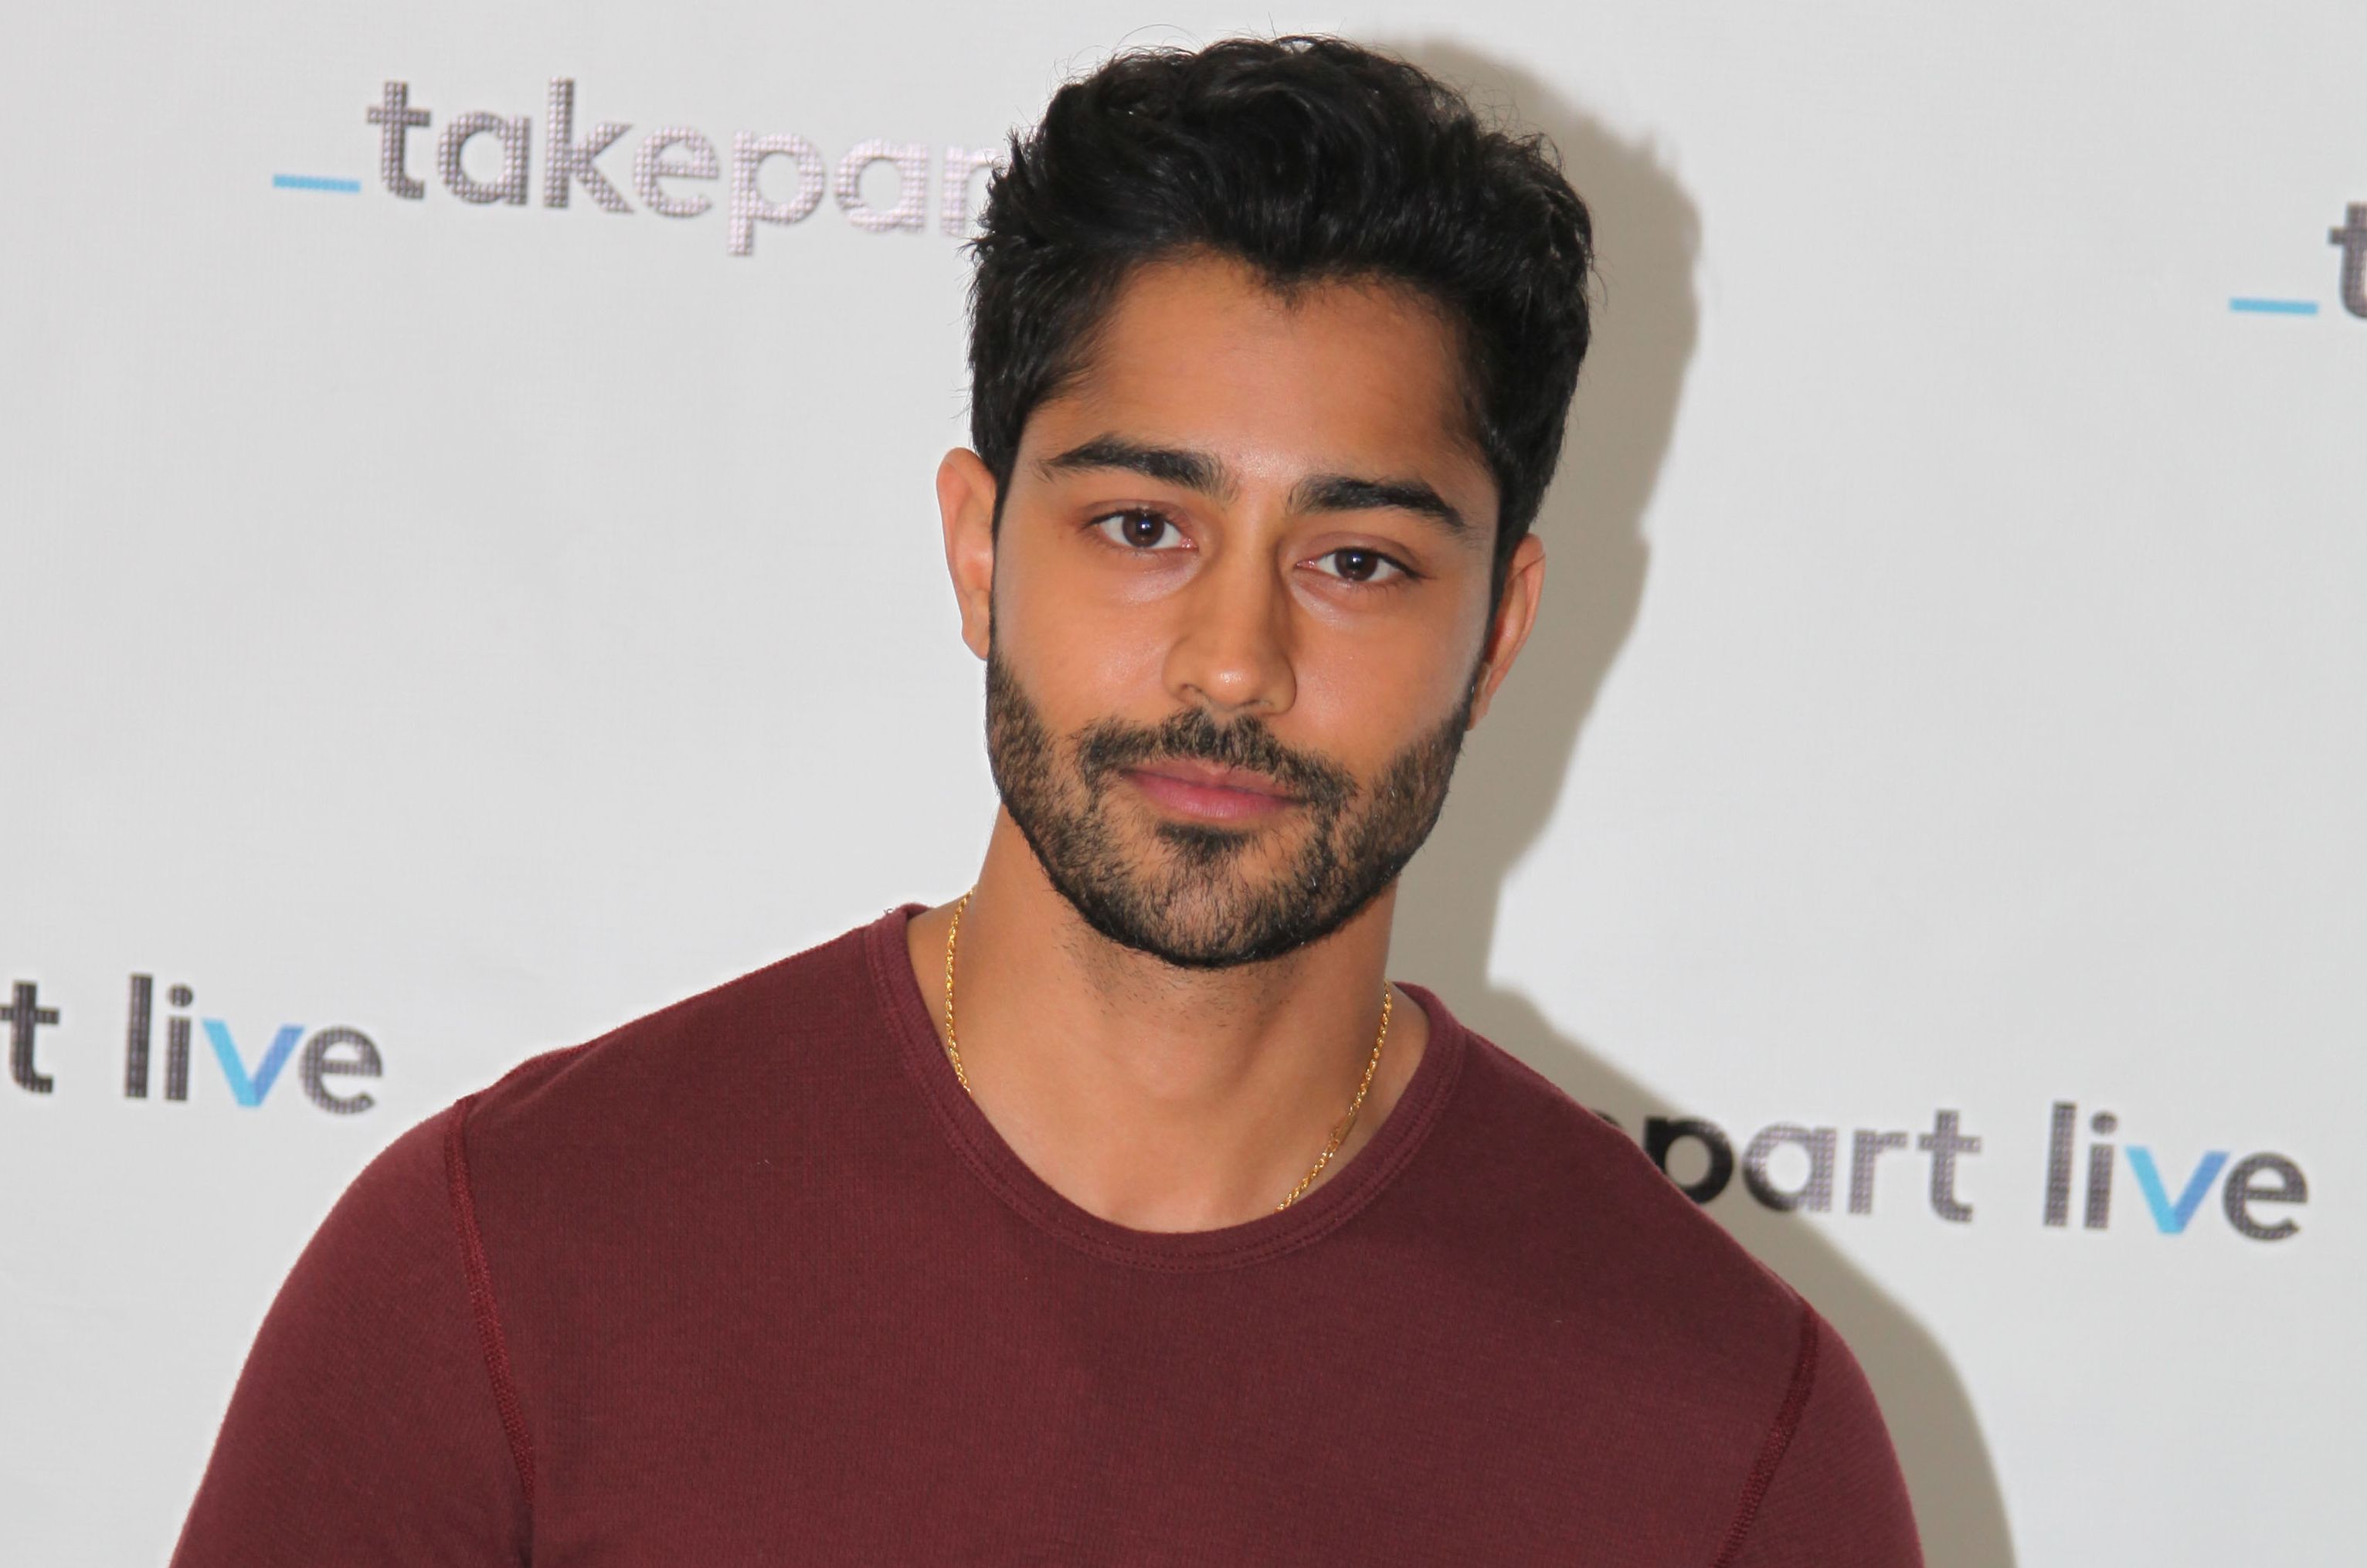 Manish Dayal lands role in Halt and Catch Fire